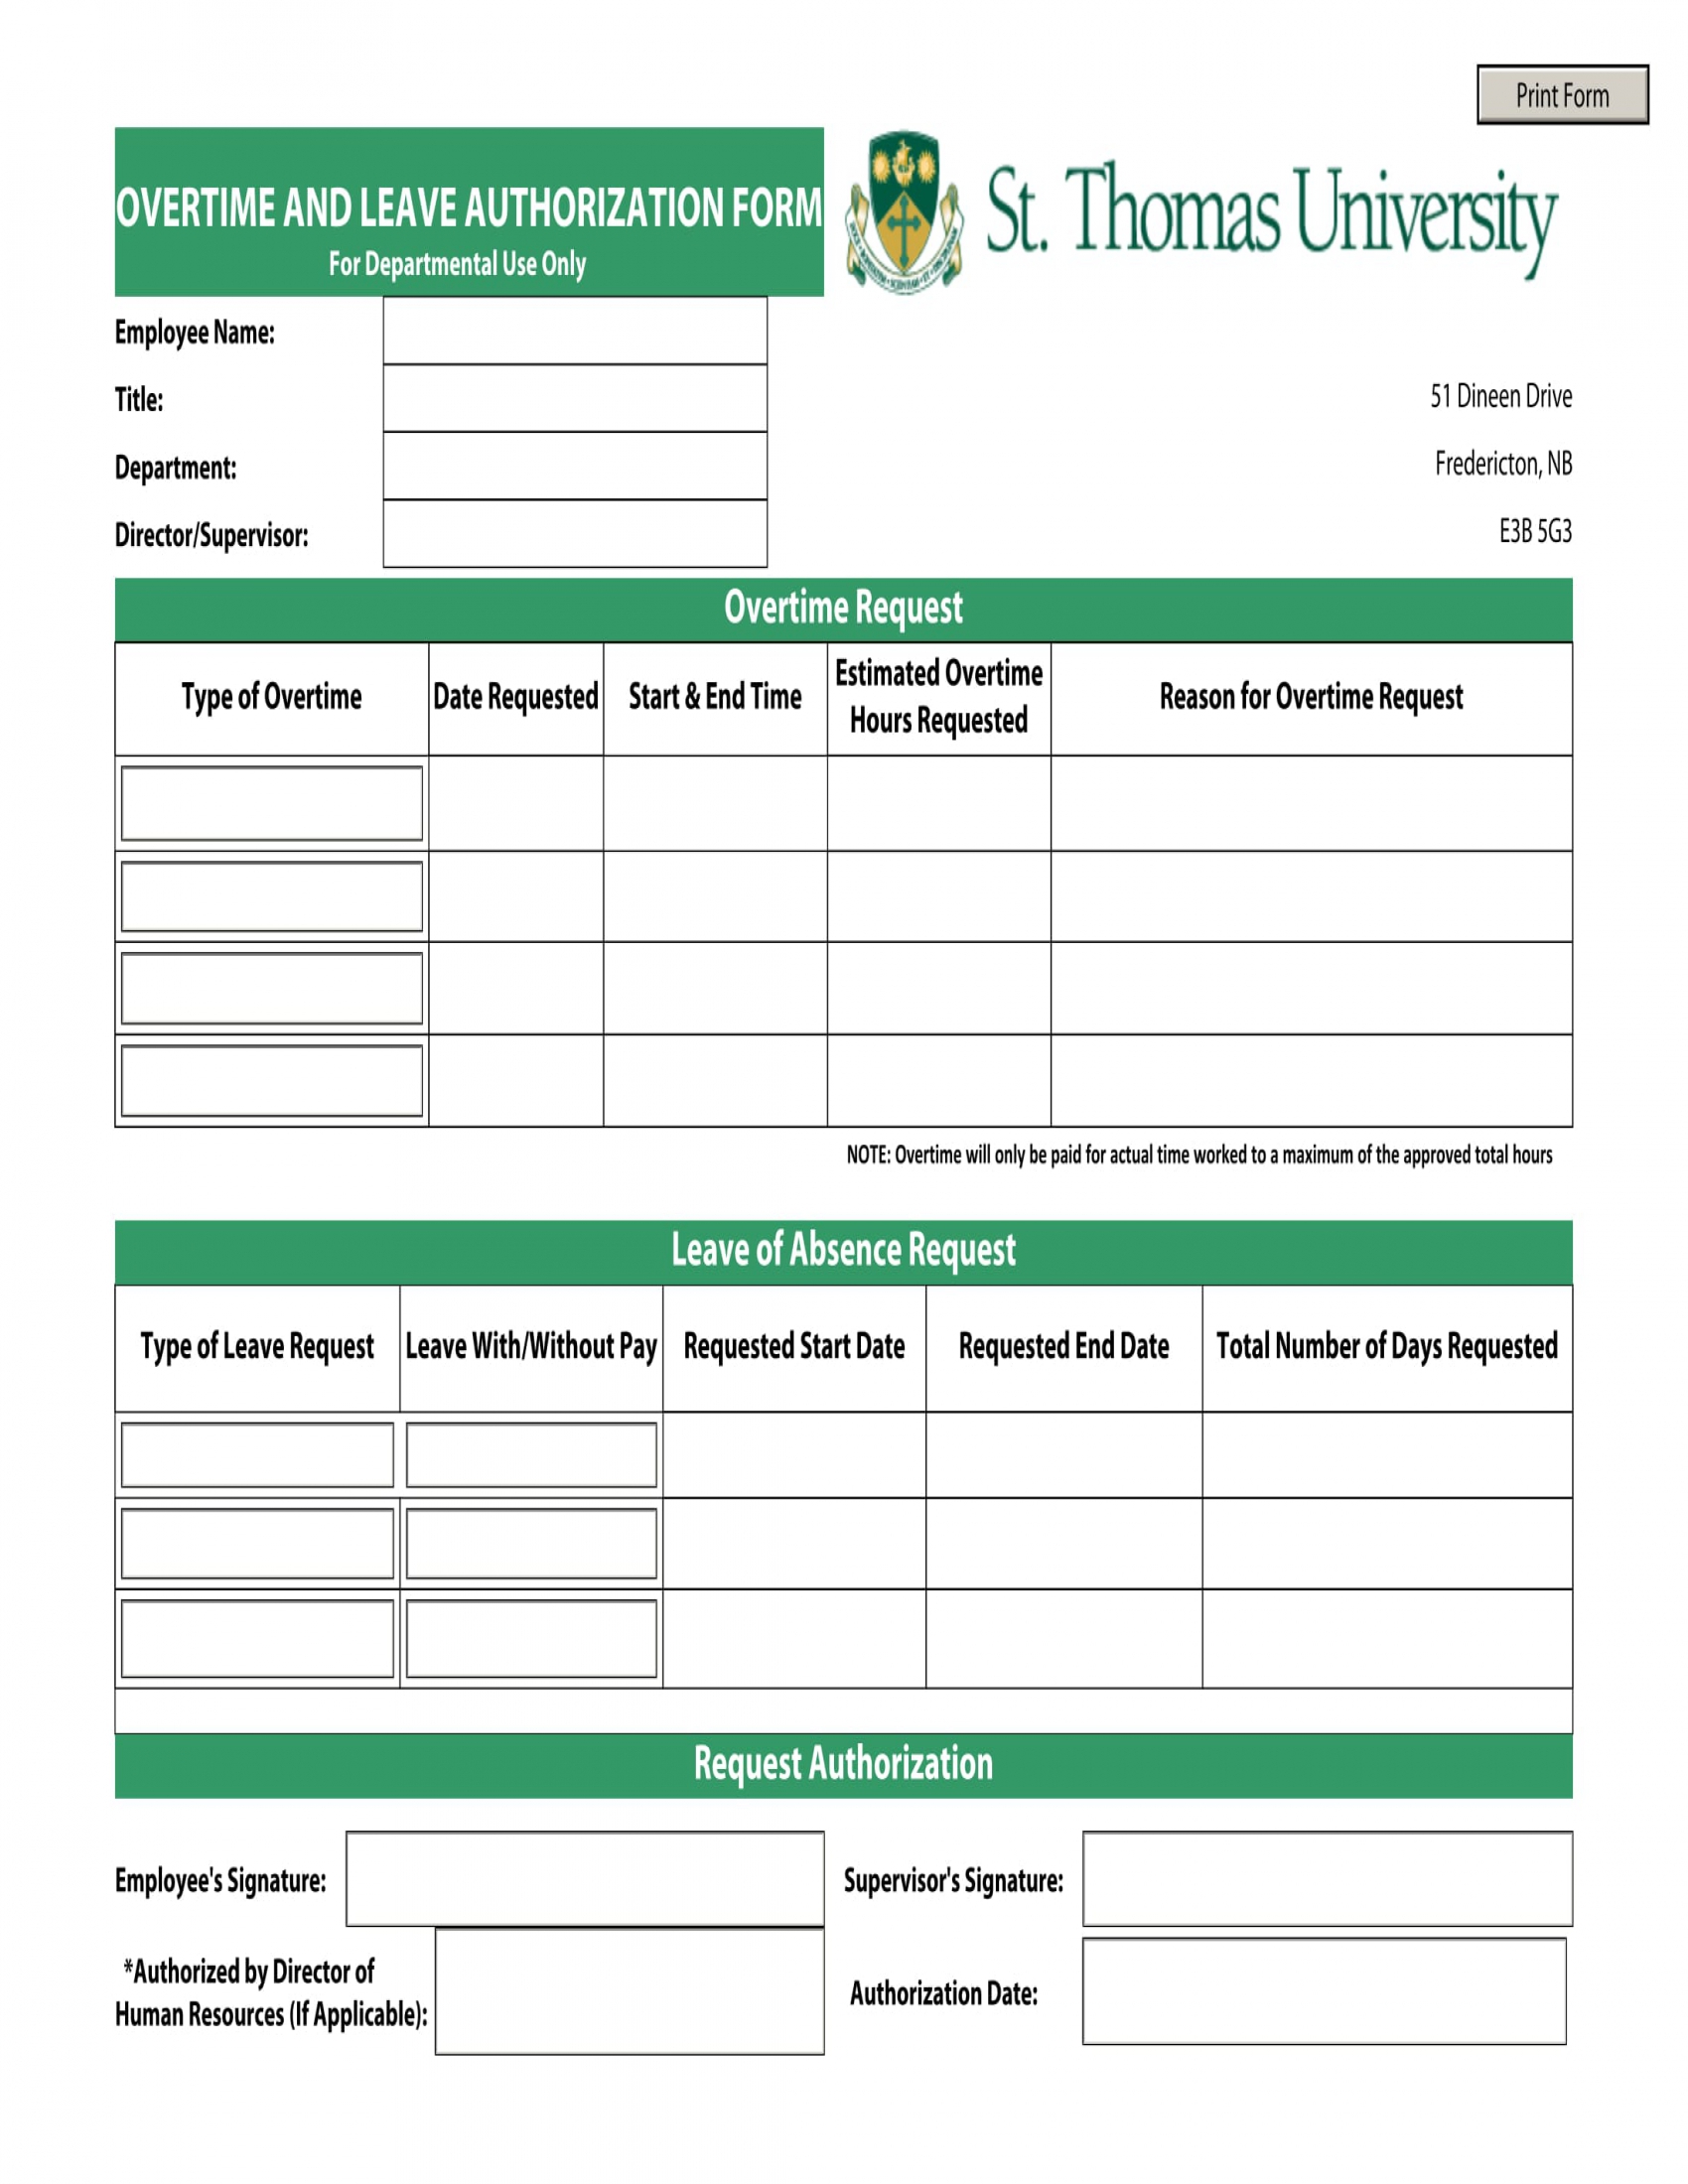 overtime leave authorization form